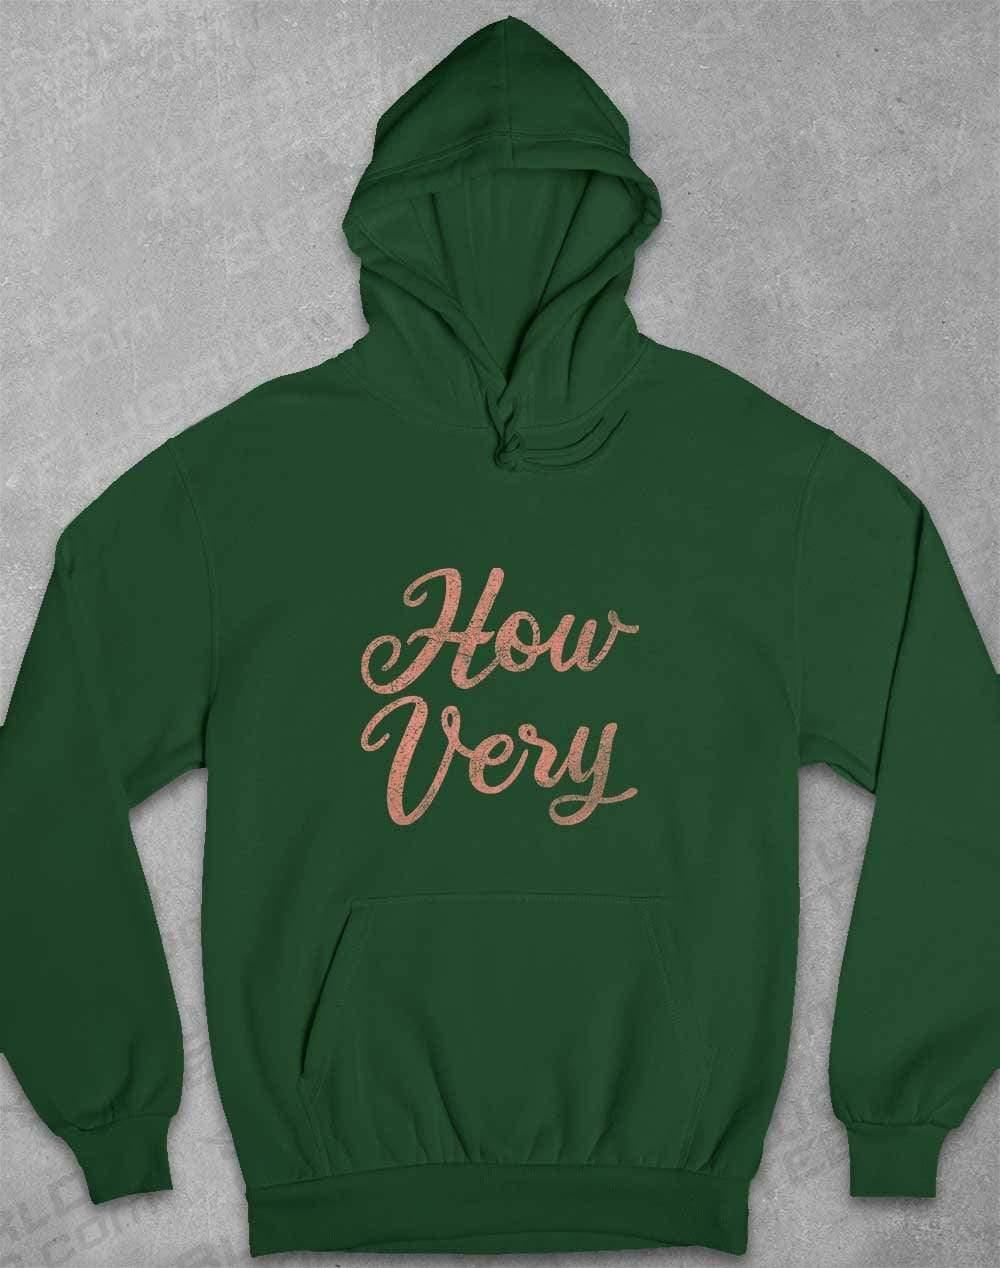 How Very Hoodie XS / Bottle Green  - Off World Tees